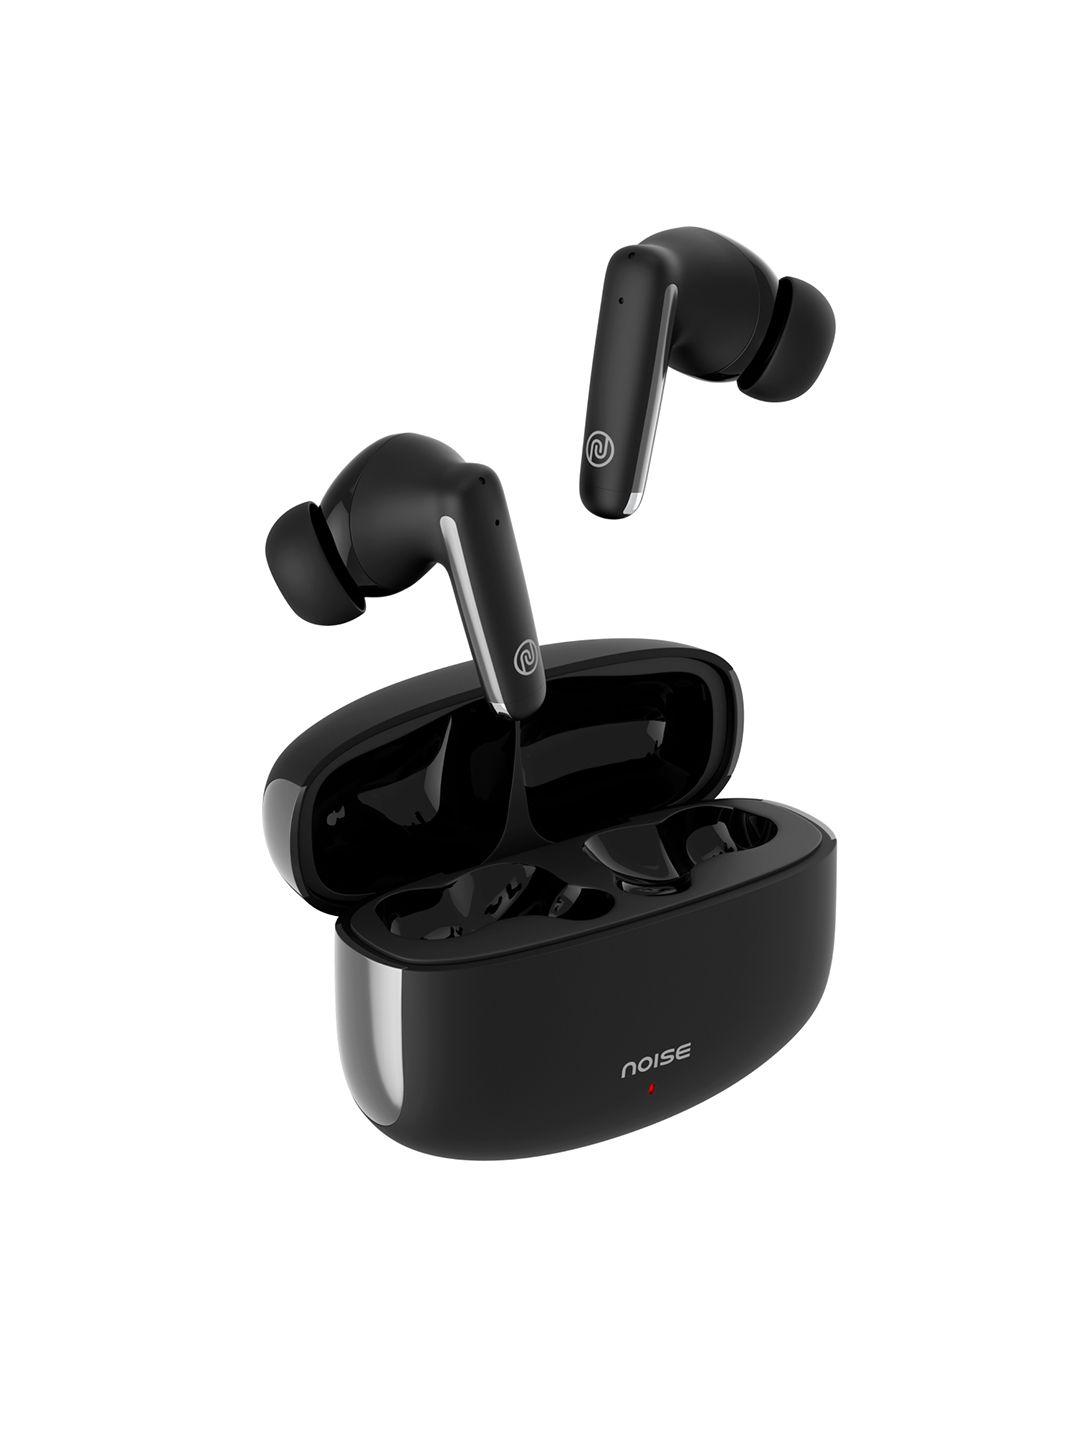 noise buds venus truly wireless earbuds with 30db anc and 40hrs playtime